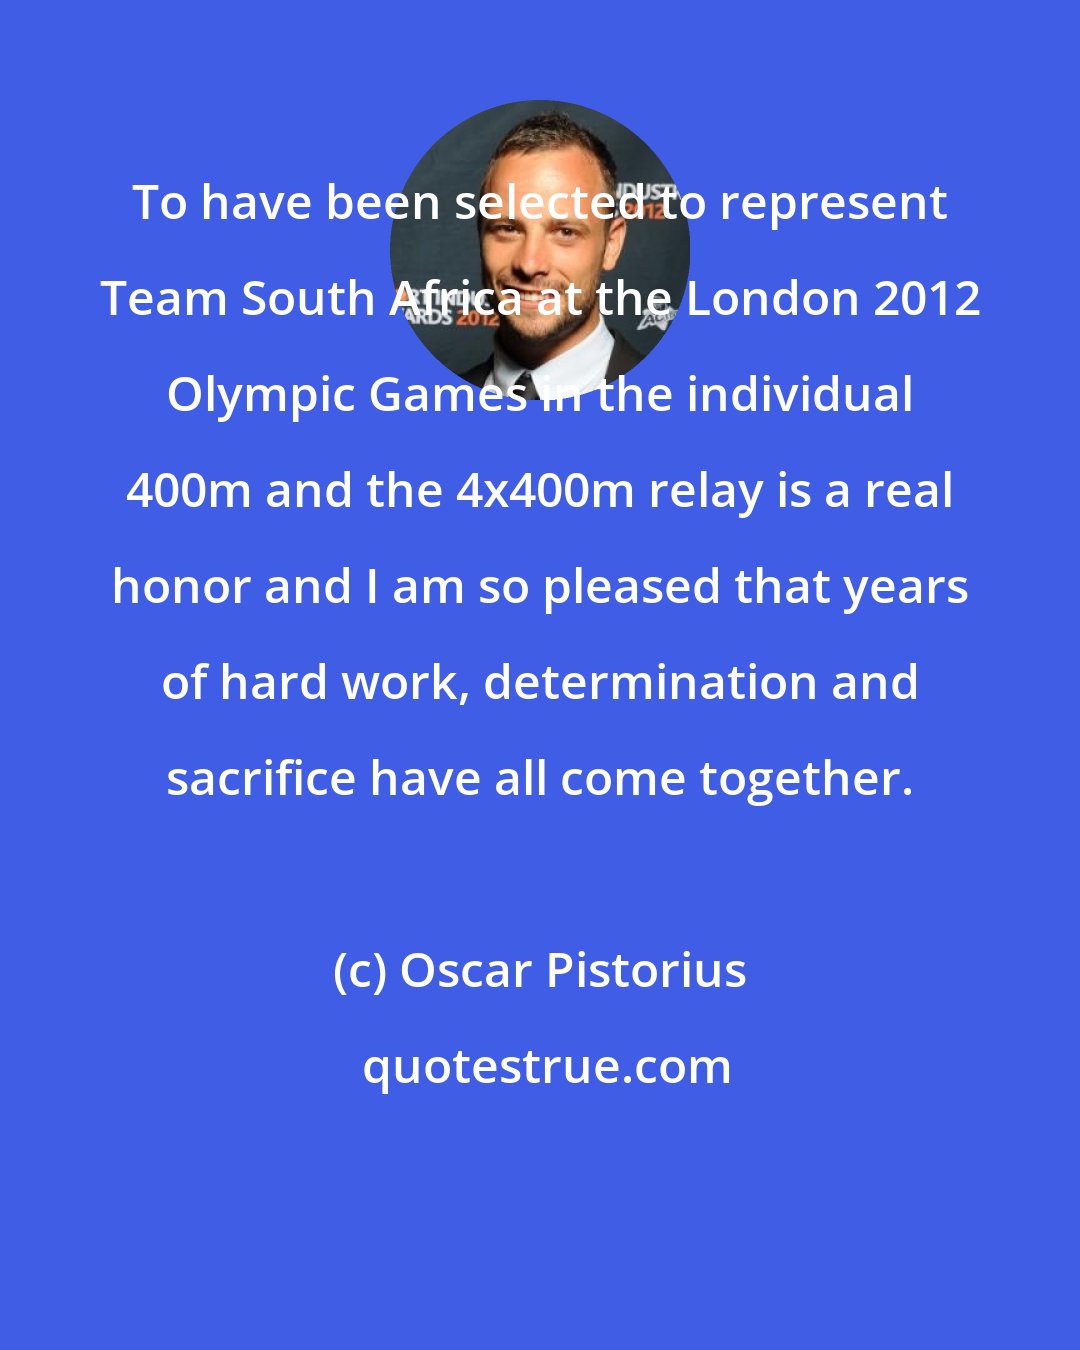 Oscar Pistorius: To have been selected to represent Team South Africa at the London 2012 Olympic Games in the individual 400m and the 4x400m relay is a real honor and I am so pleased that years of hard work, determination and sacrifice have all come together.